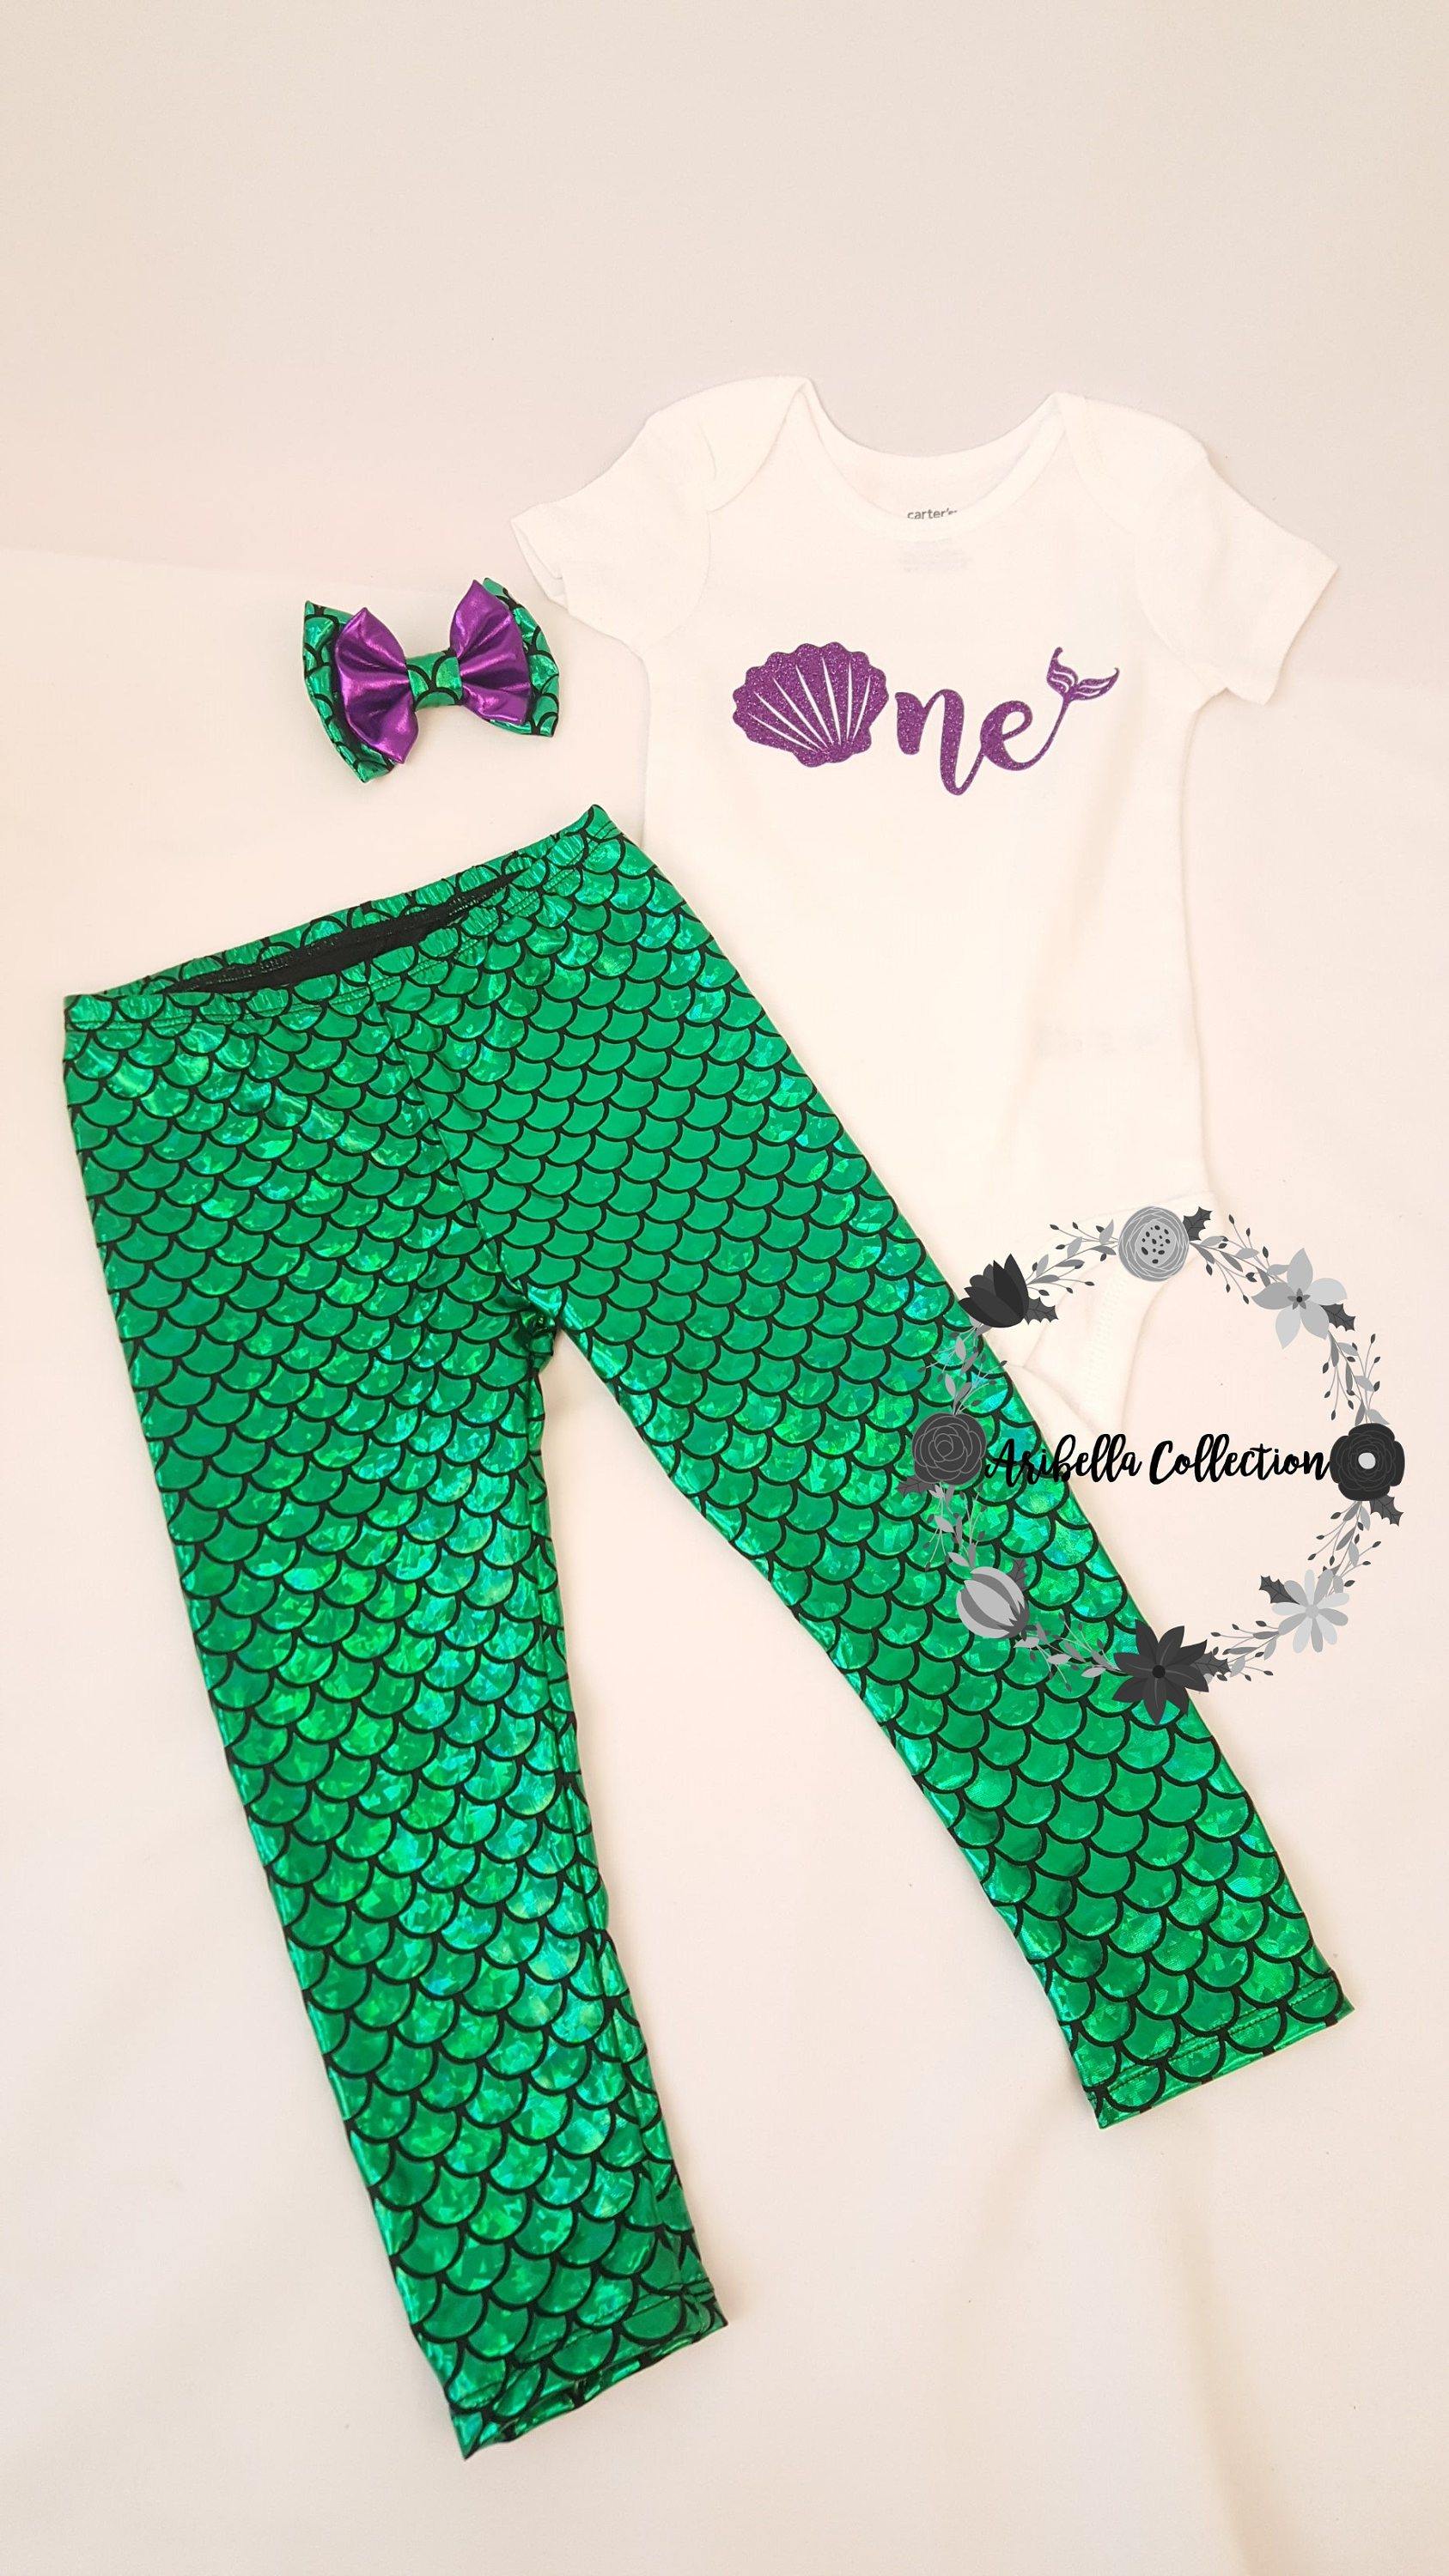 Age One to Nine Bodysuit or T-shirt, Legging, & Hair Clip Bow Outfit - Aribella Collection, Inc.